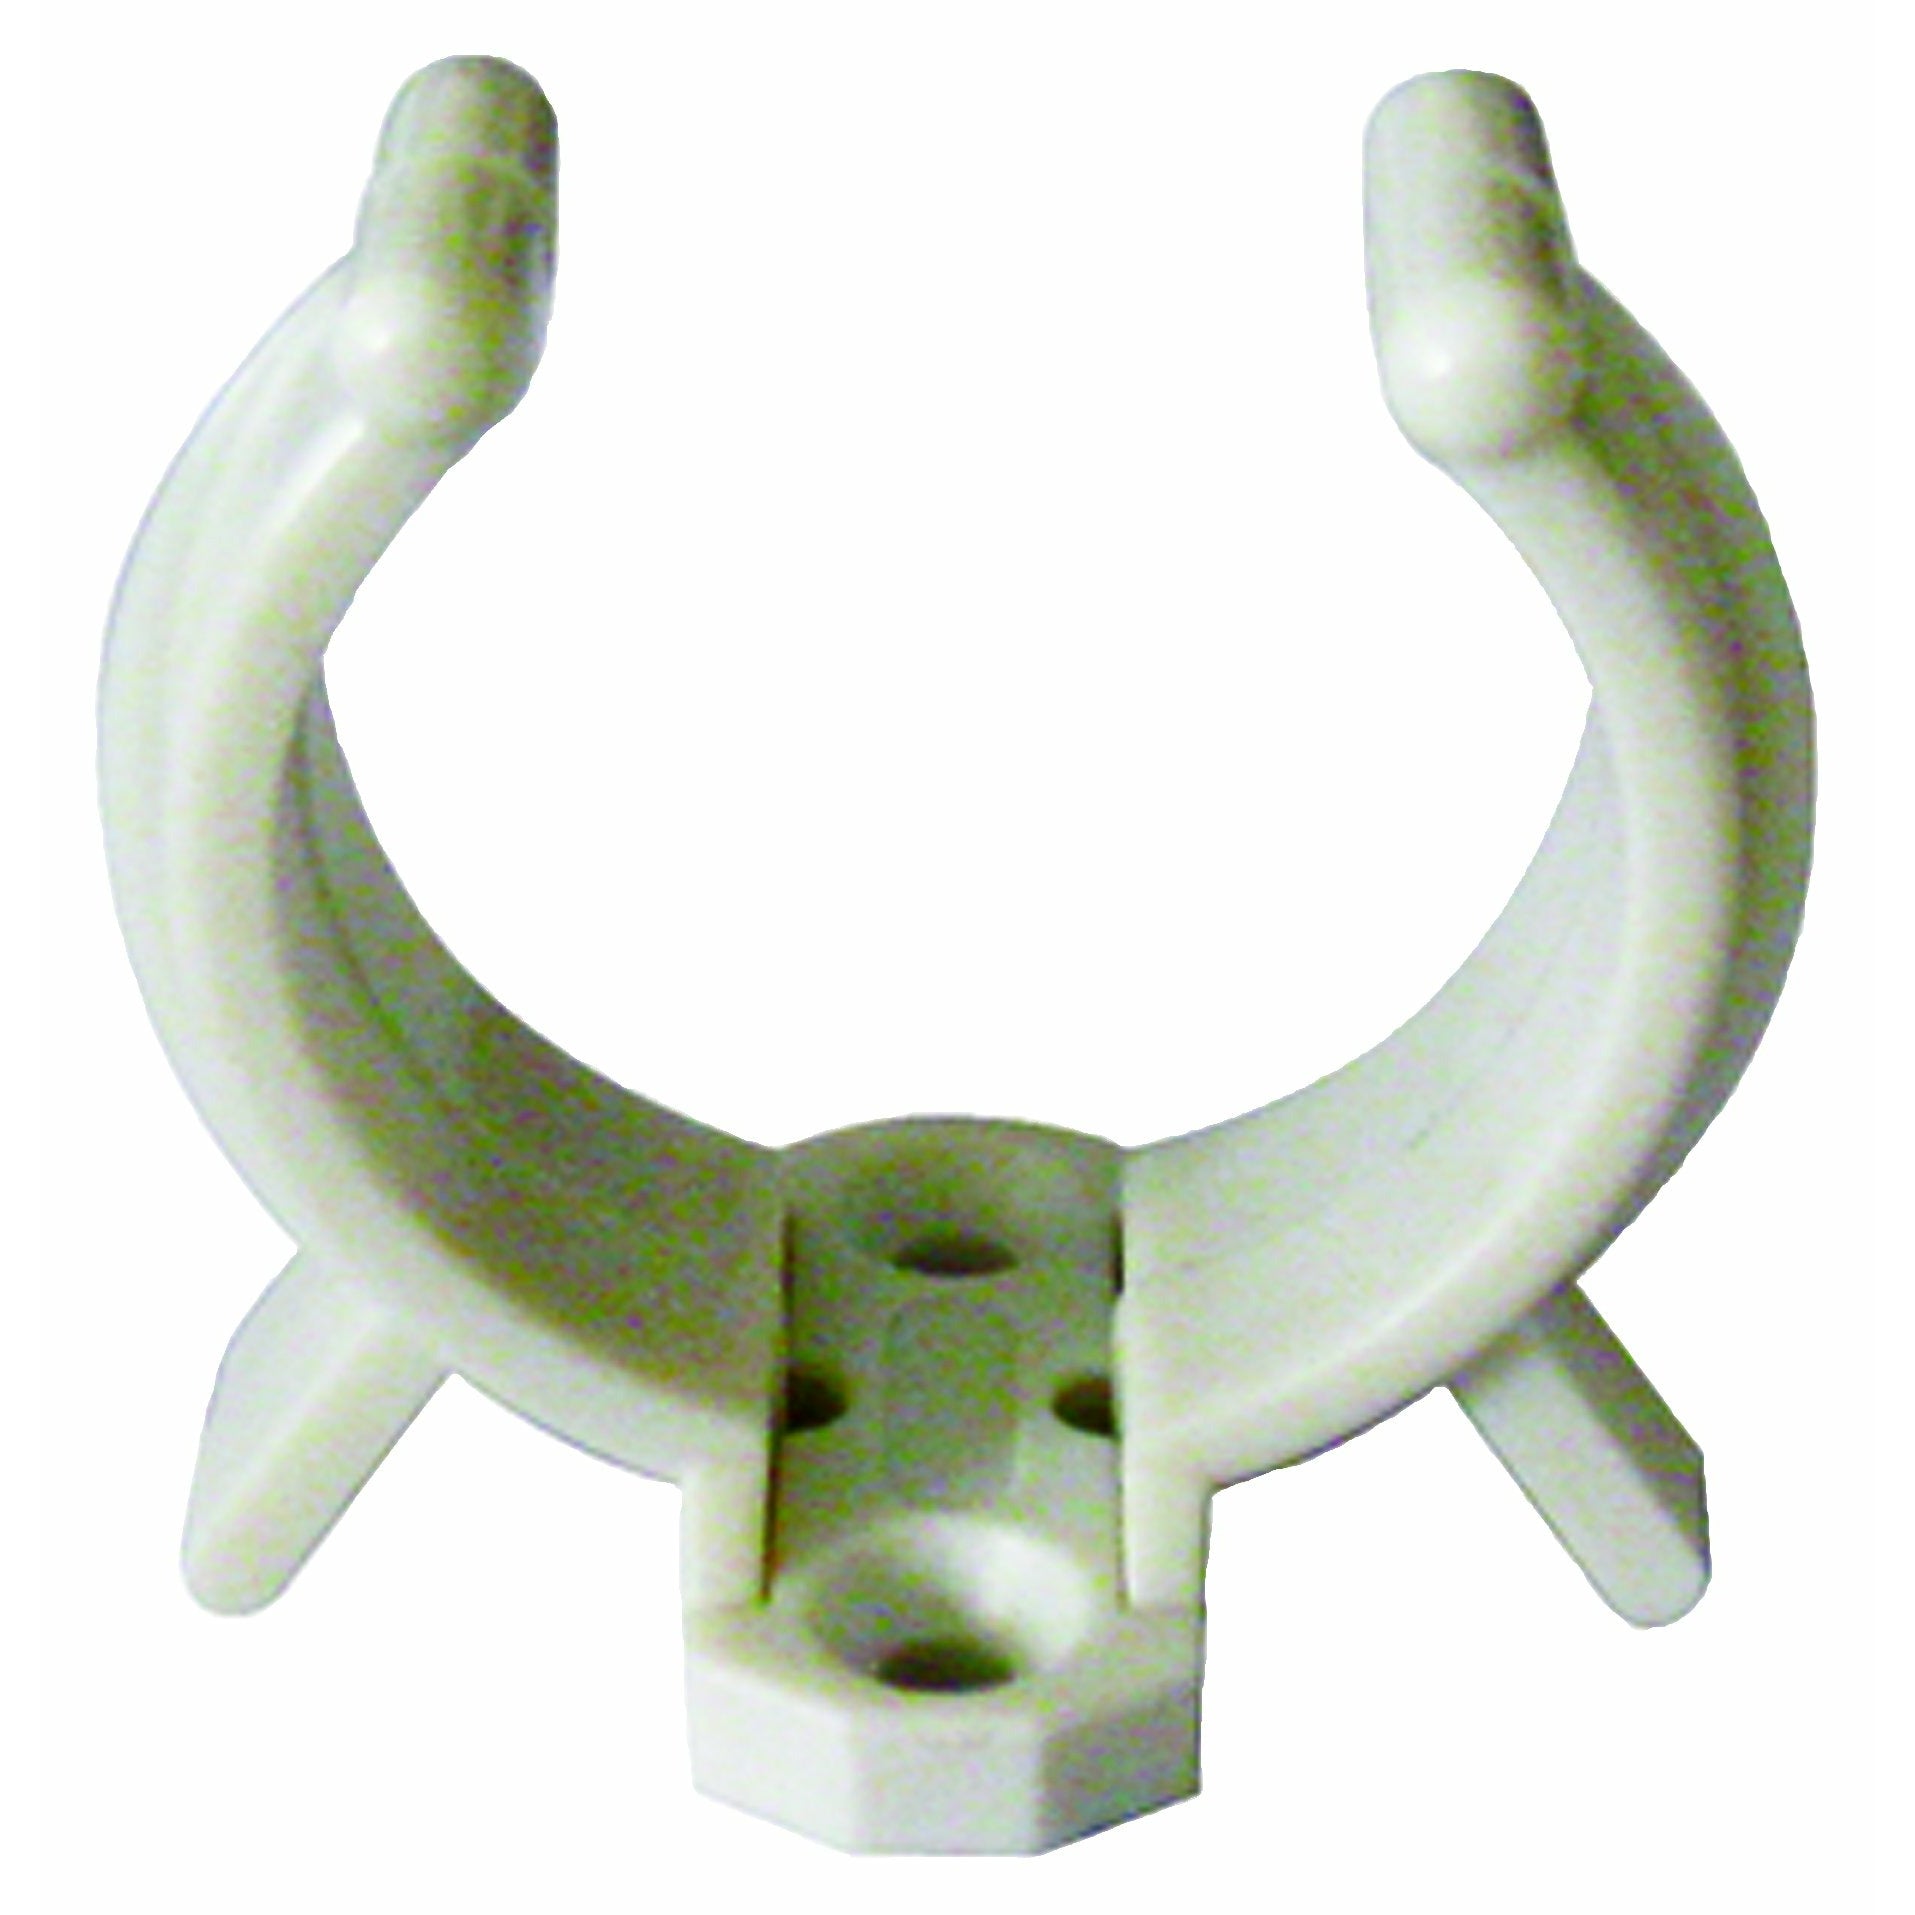 Talamex Clip Holders For Oars White 17-23MM (2) 25227050